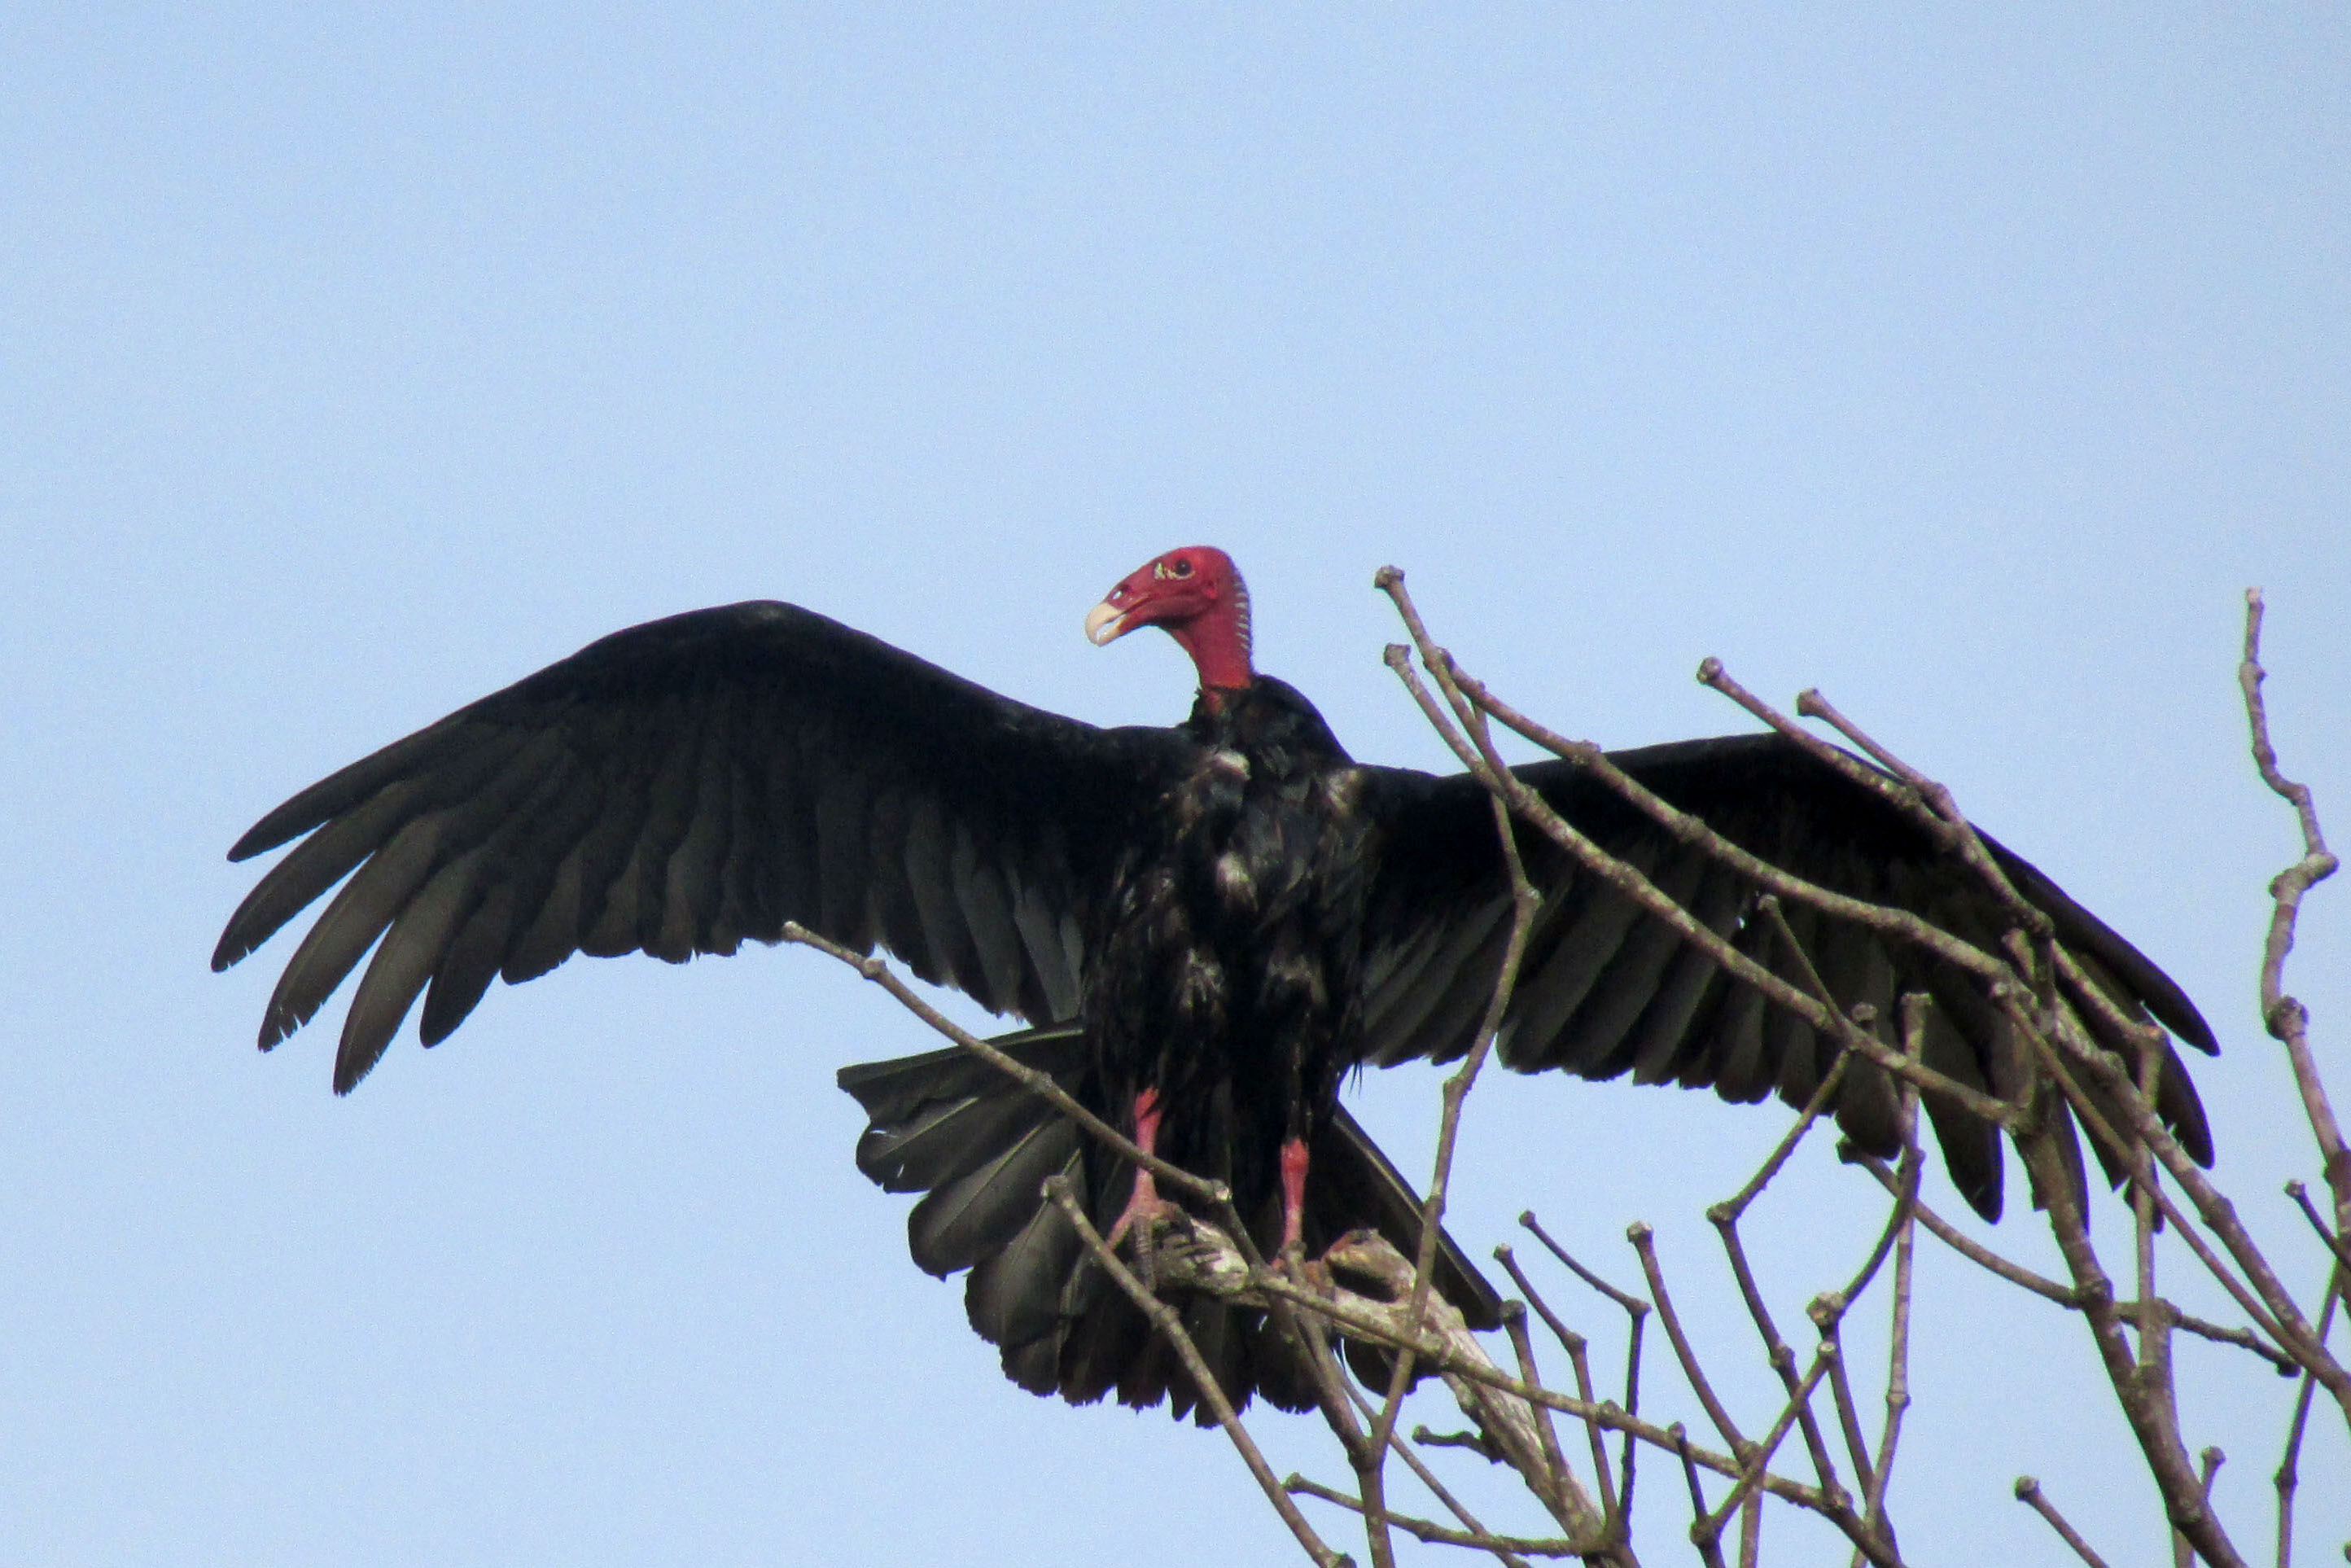 Turkey Vulture Facts – What Do Turkey Vultures Eat? Where Do Turkey Vultures Live?